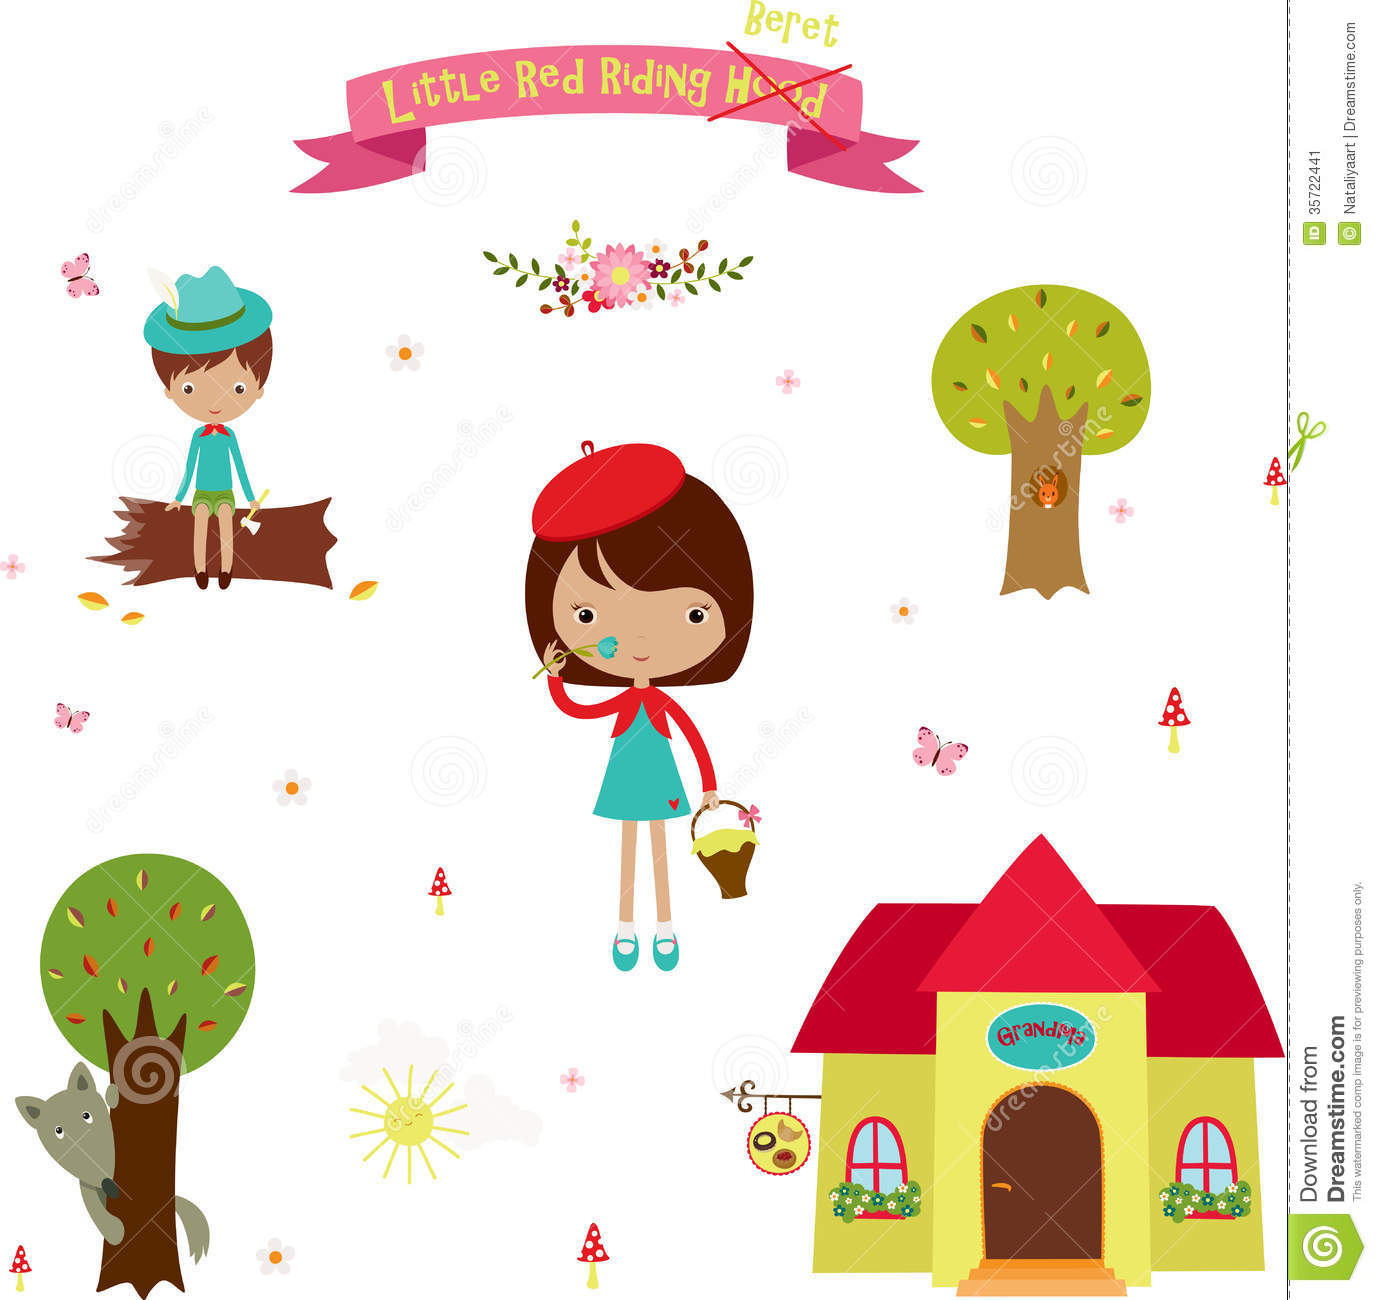     Tale Little Red Riding Hood  Cute Cartoon Elements Design Over White